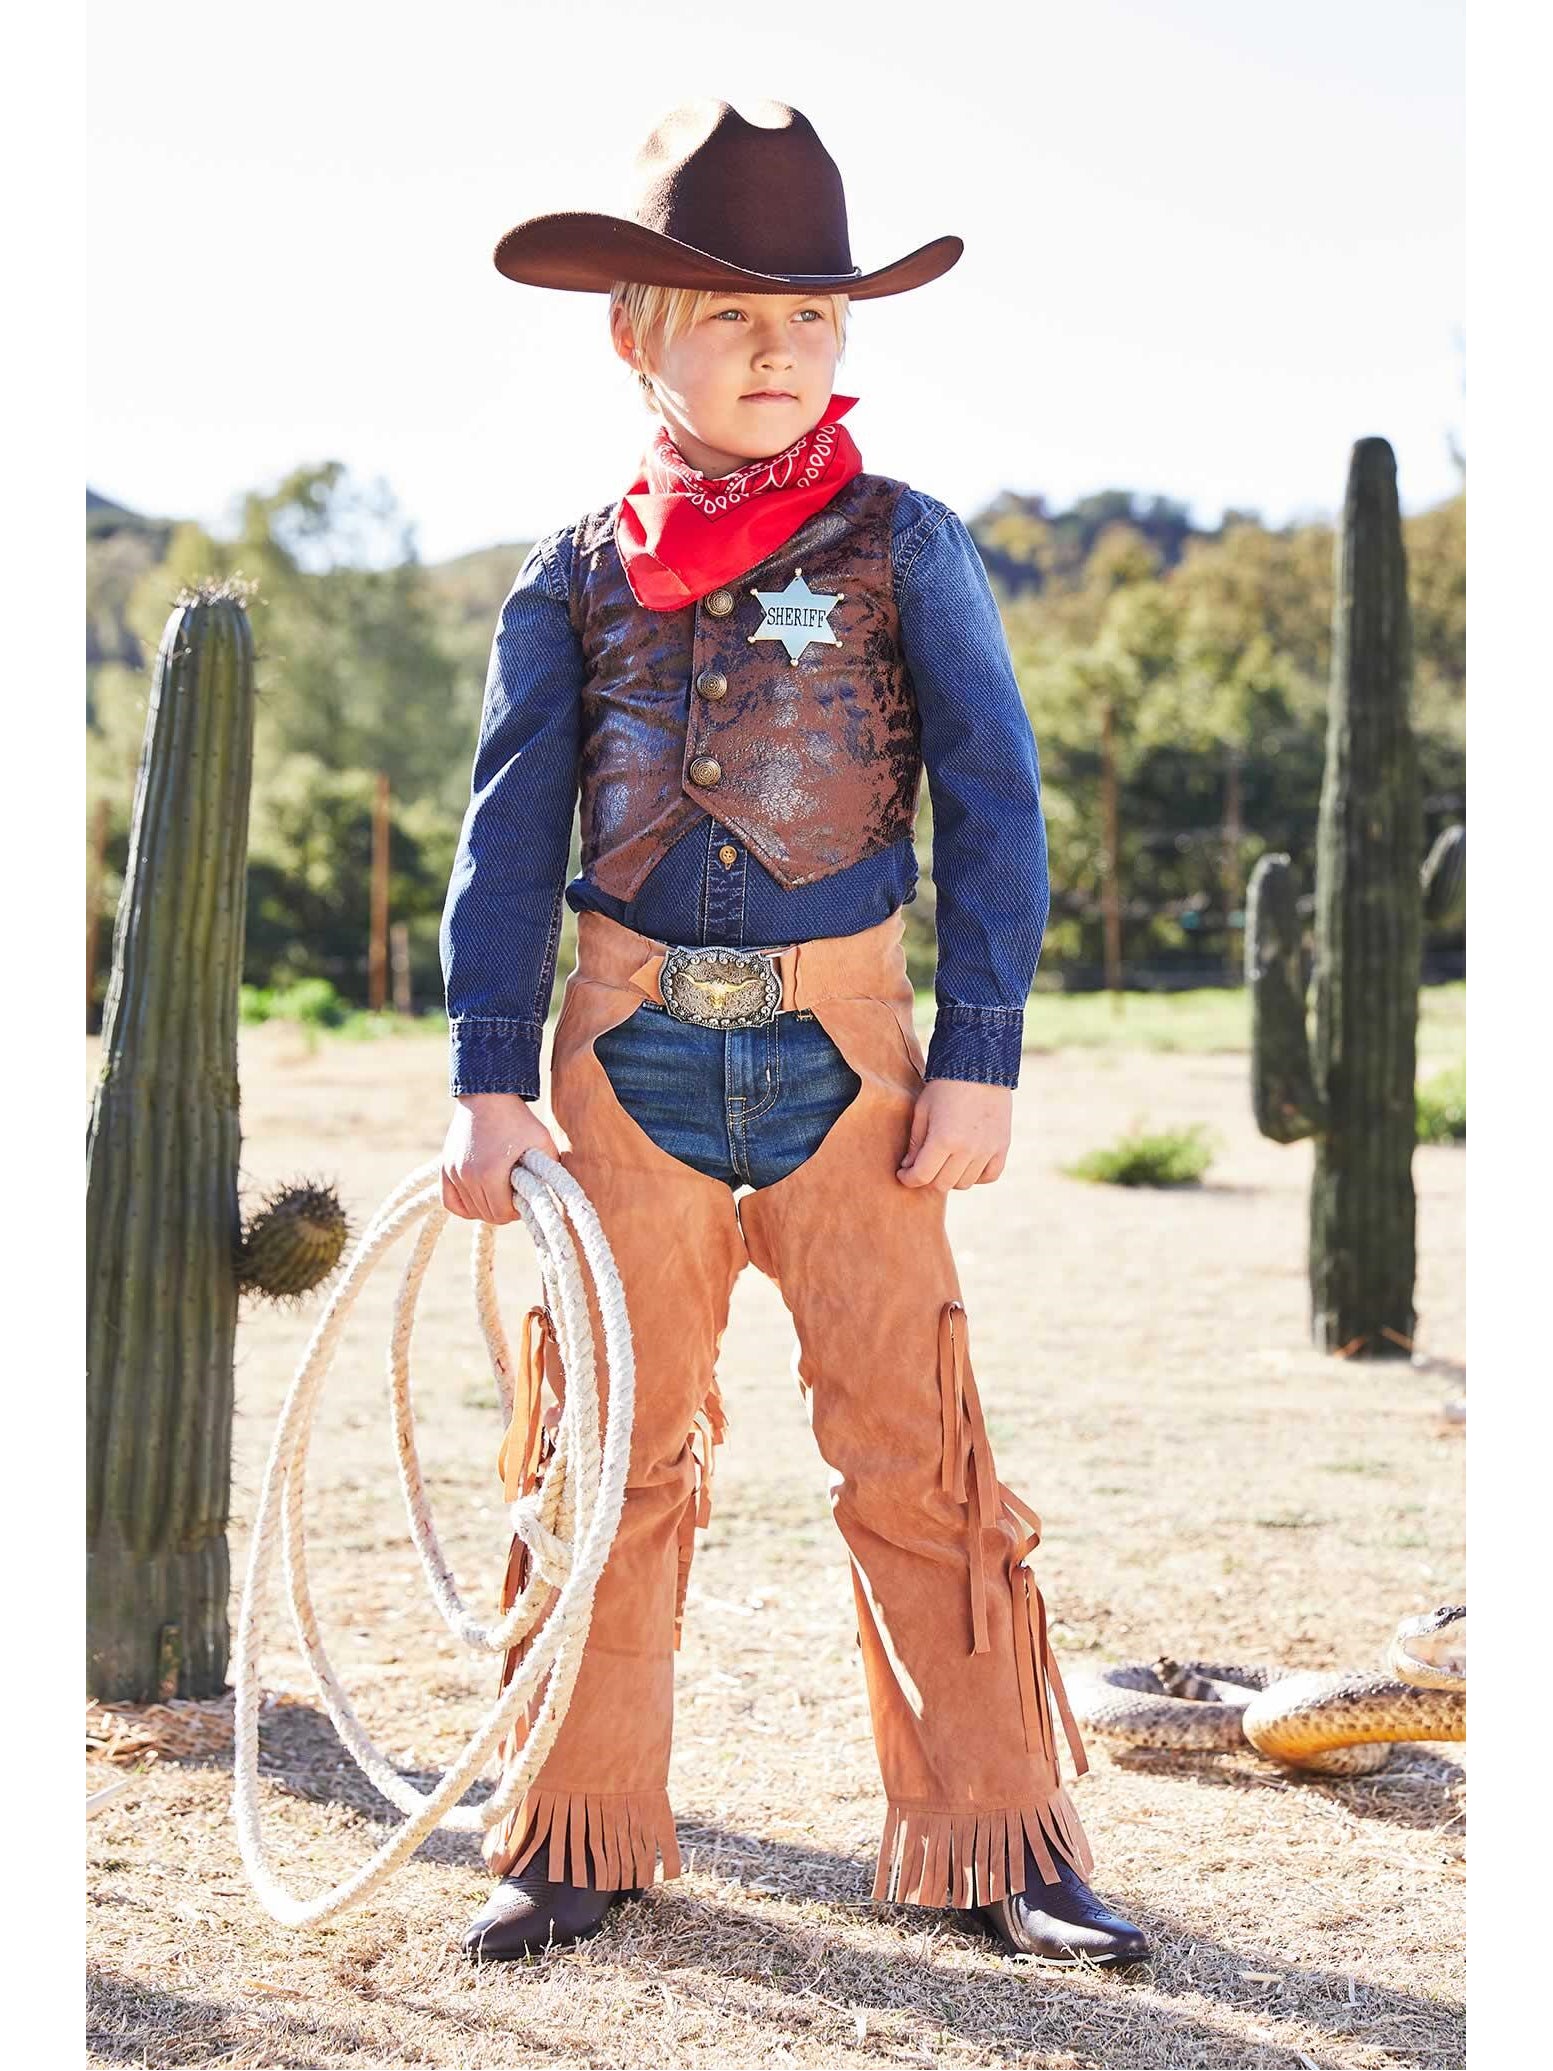 Cowboy Costume for Kids - Chasing Fireflies